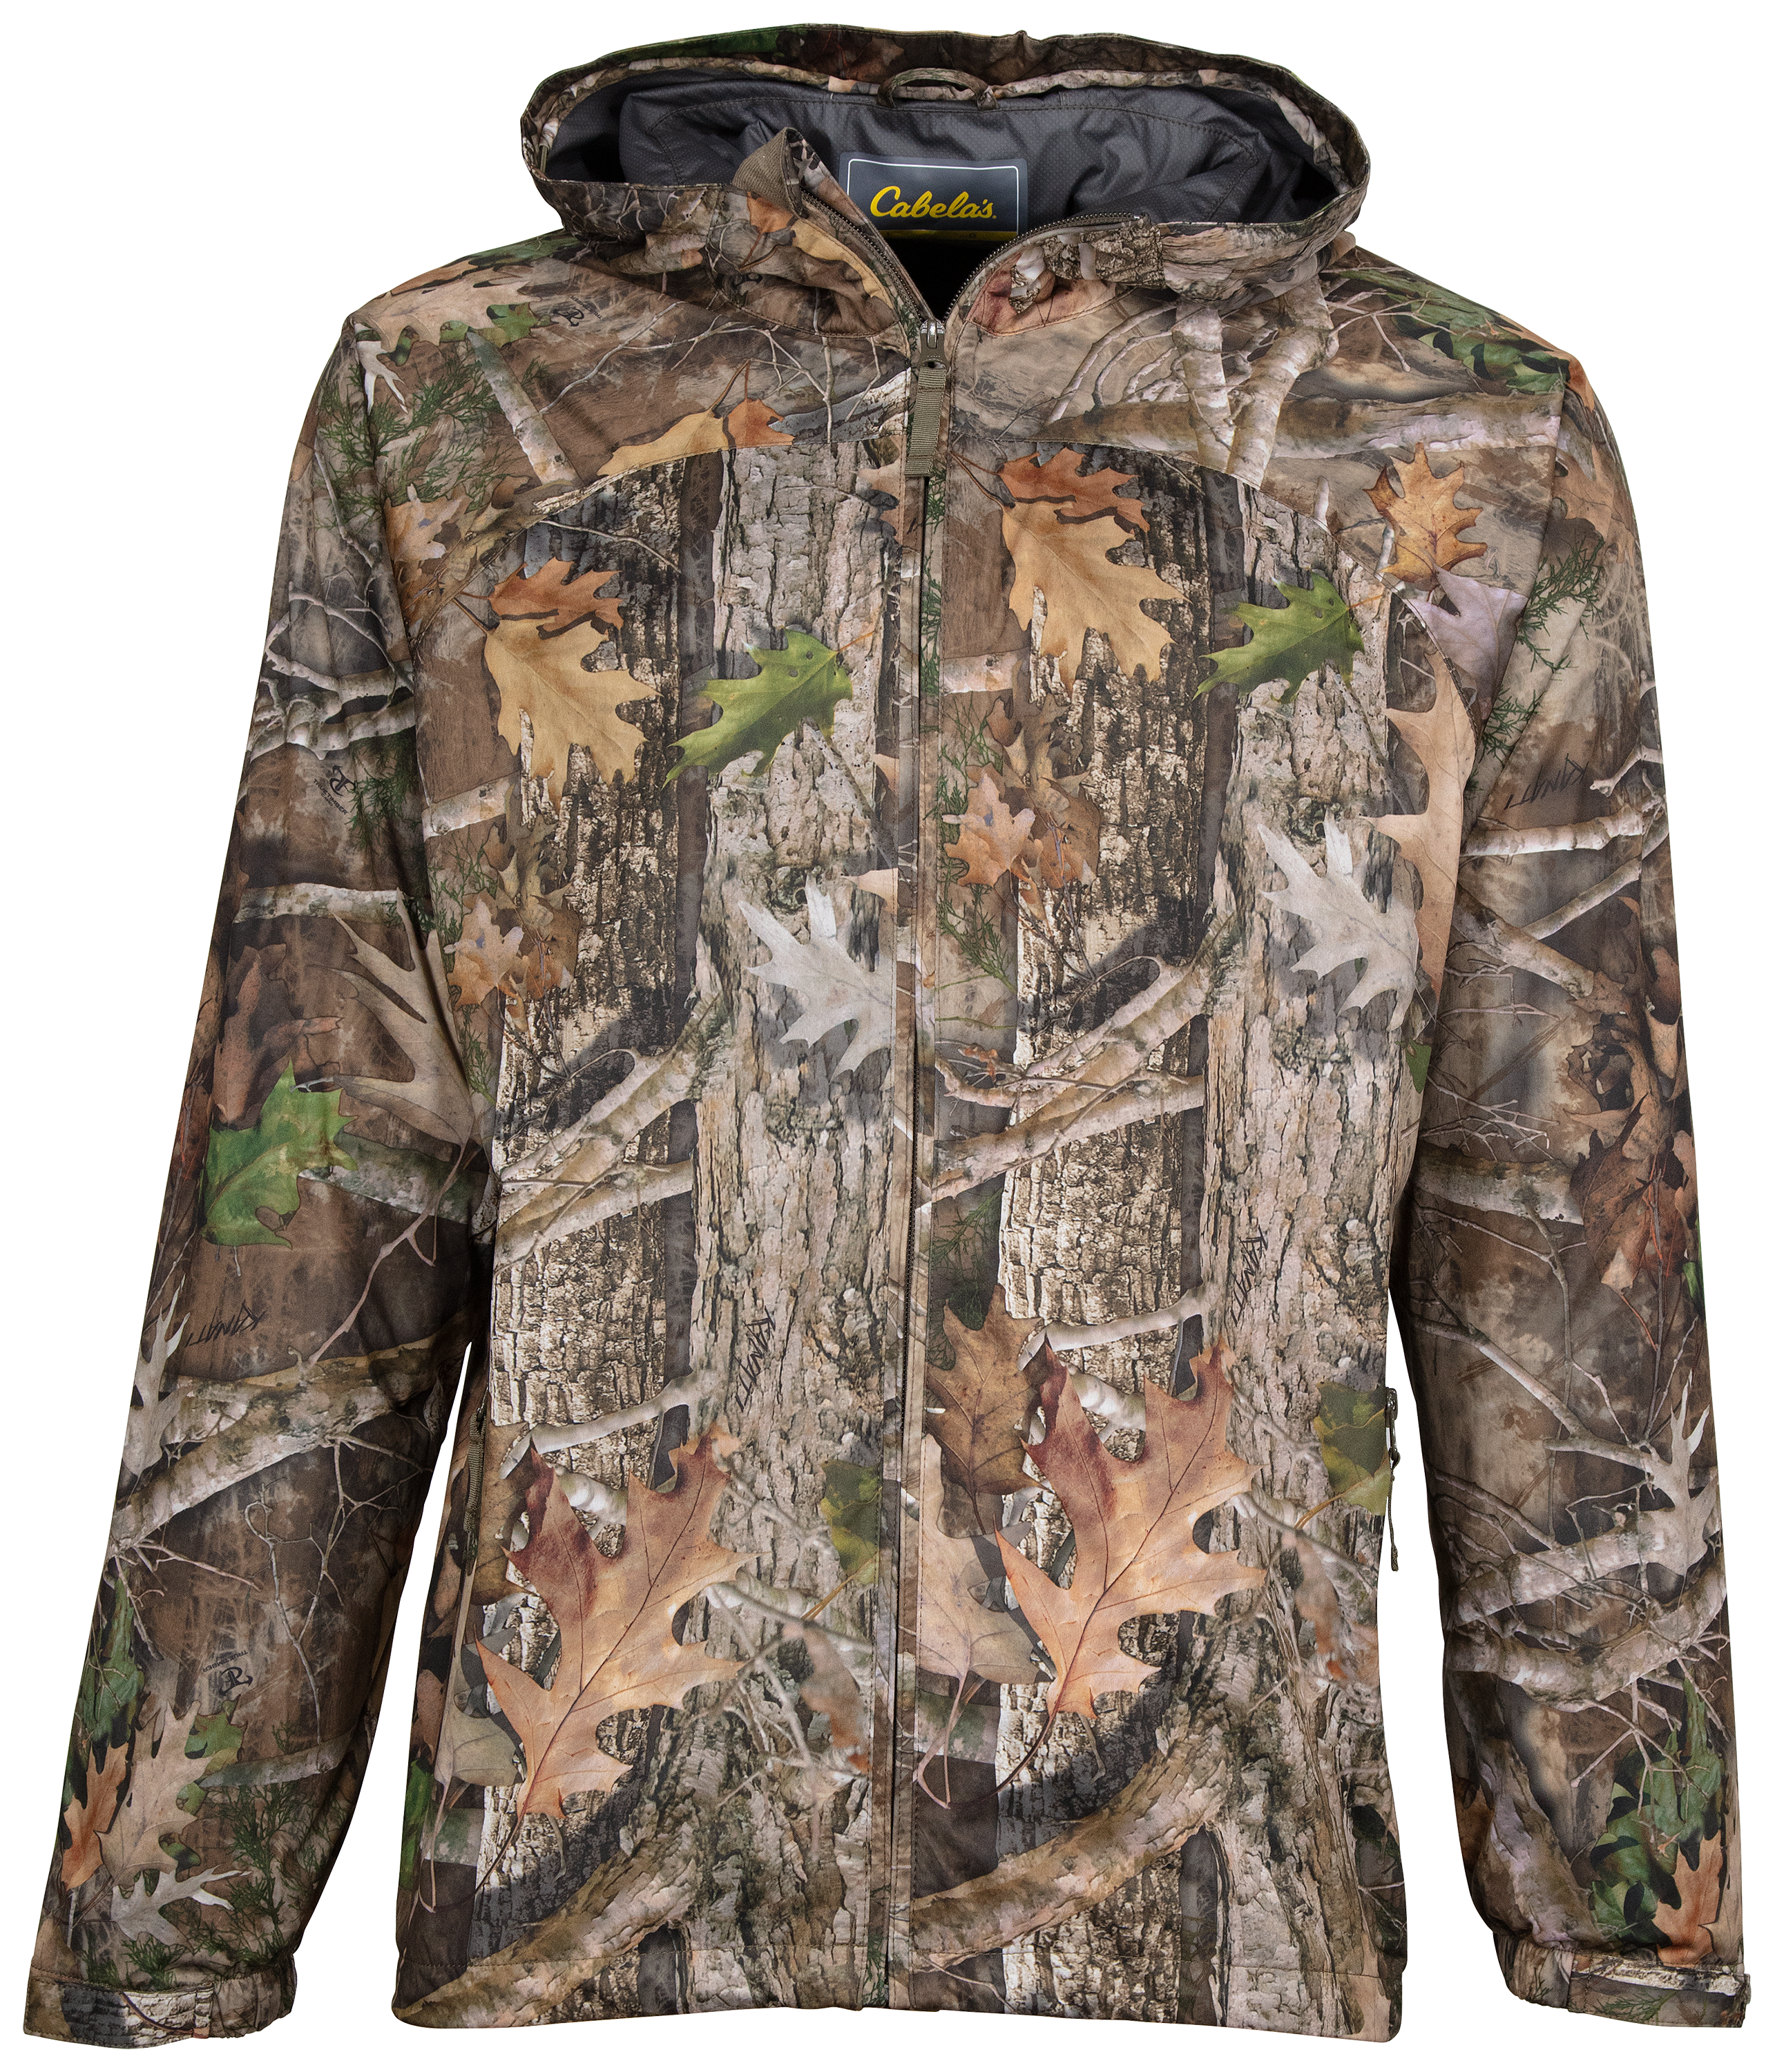 Cabela's Space Rain Full-Zip Jacket with 4MOST DRY-PLUS